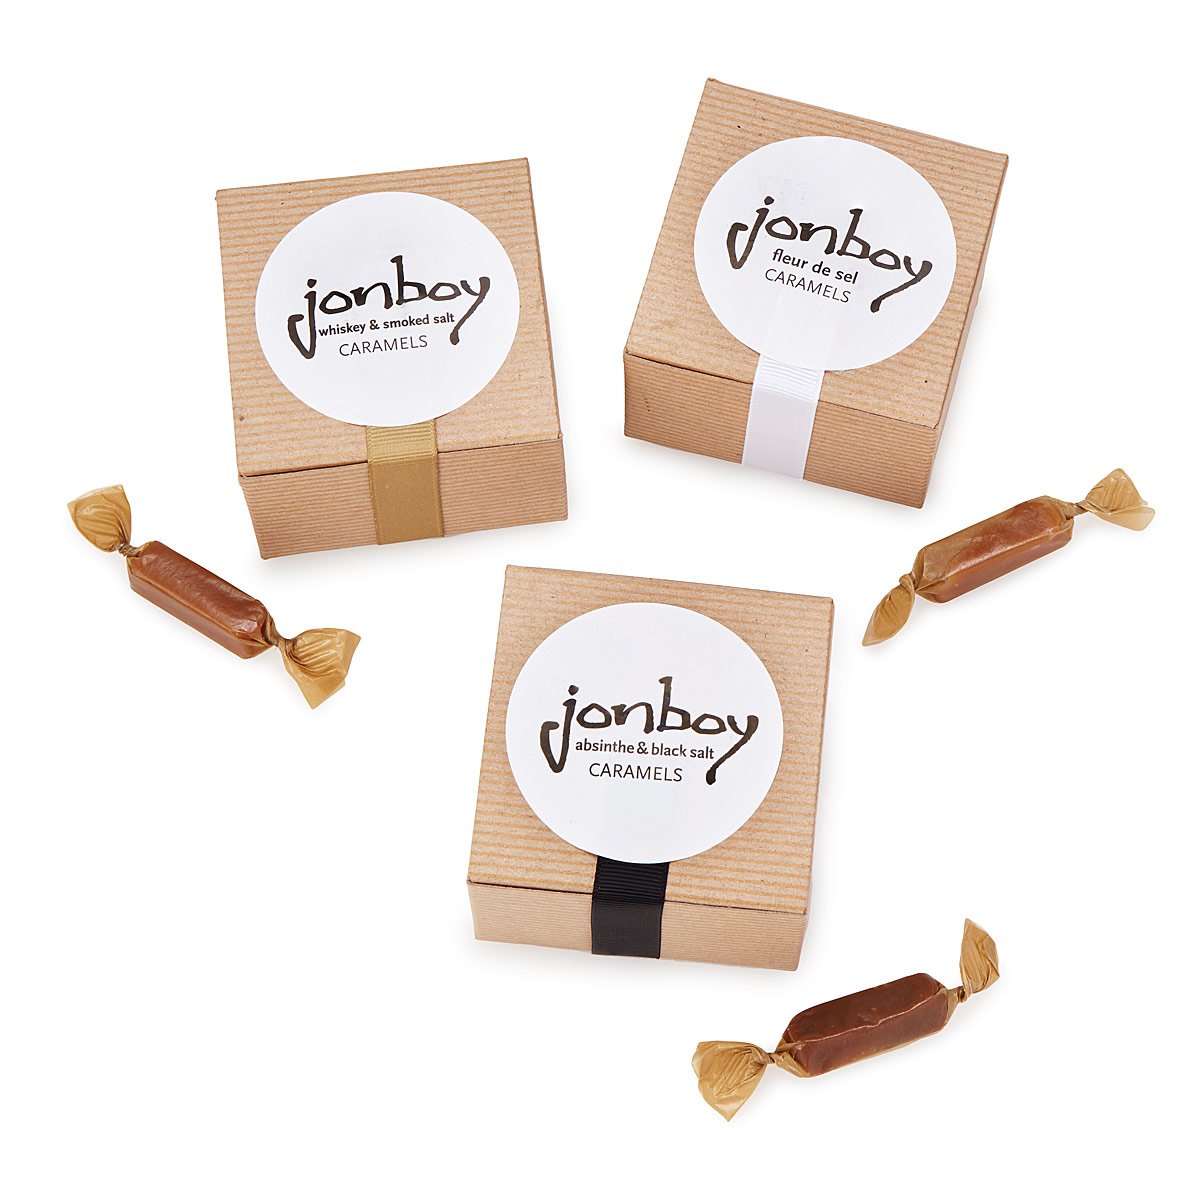 Gourmet stocking stuffers: Boozy Caramels by Jonboy at Uncomon Goods | Cool Mom Eats holiday gift guide 2017